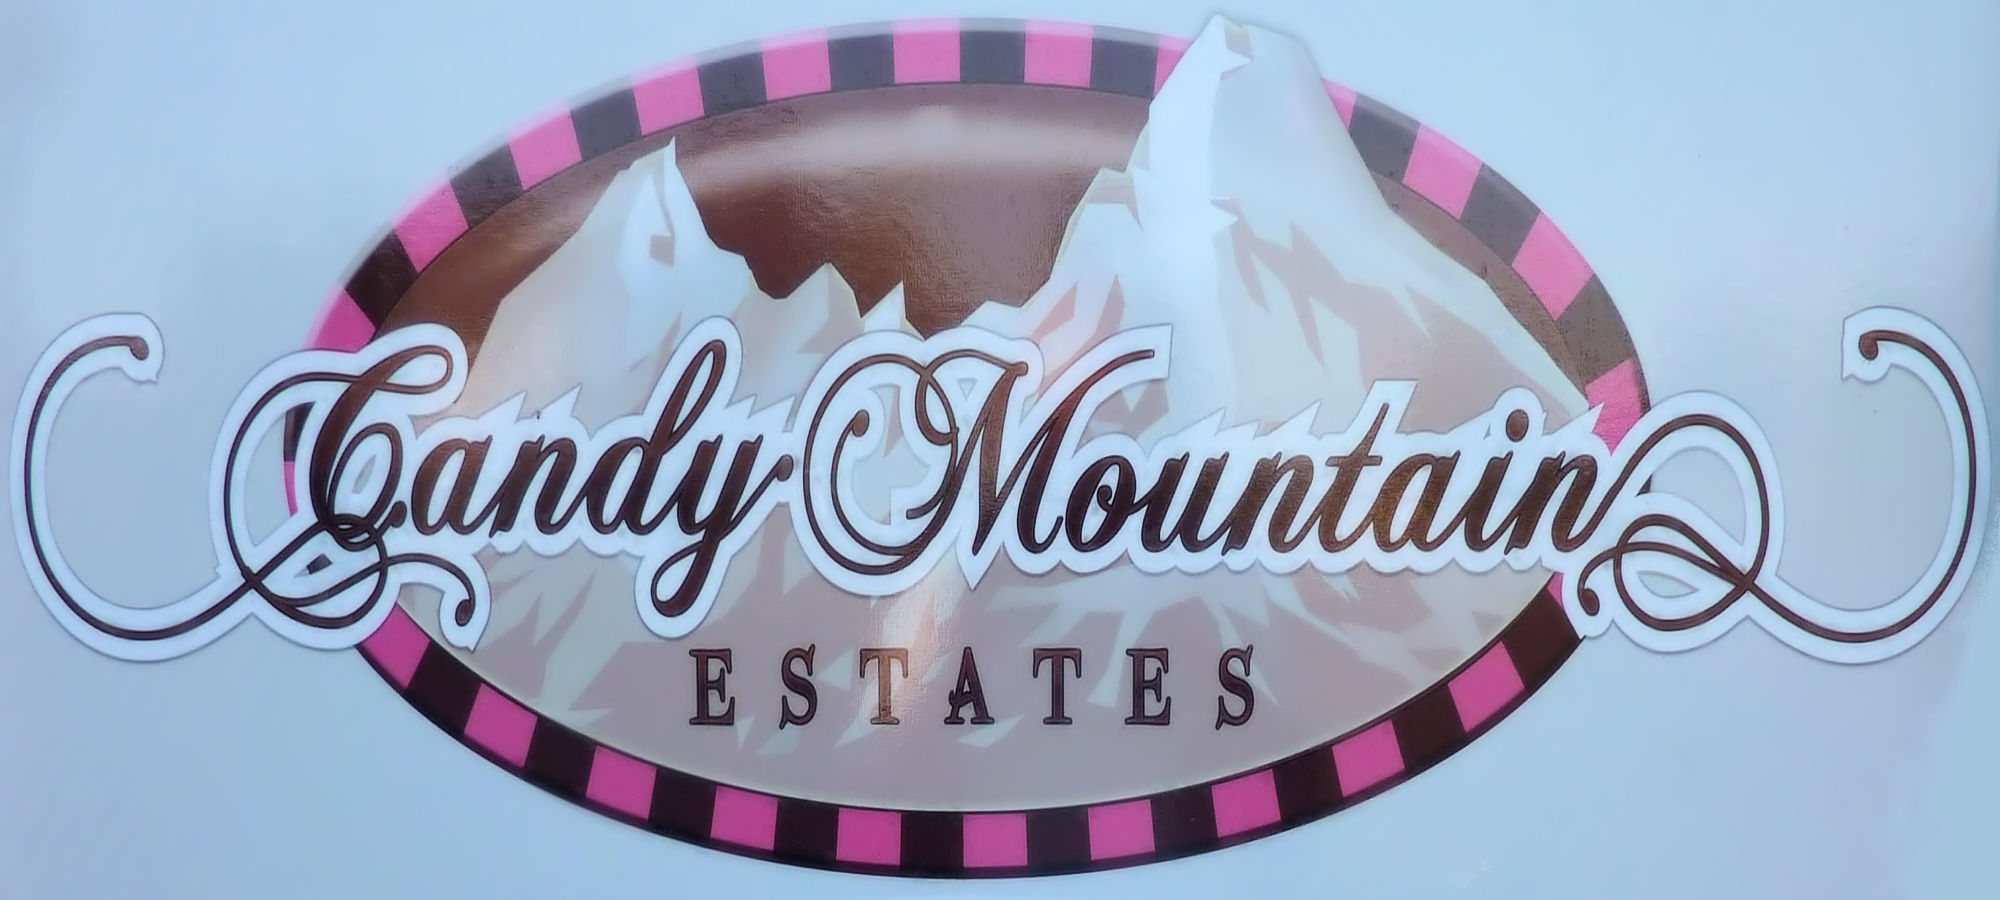 Candy Mountain Estates West Richland Washington Homes for Sale and Real Estate